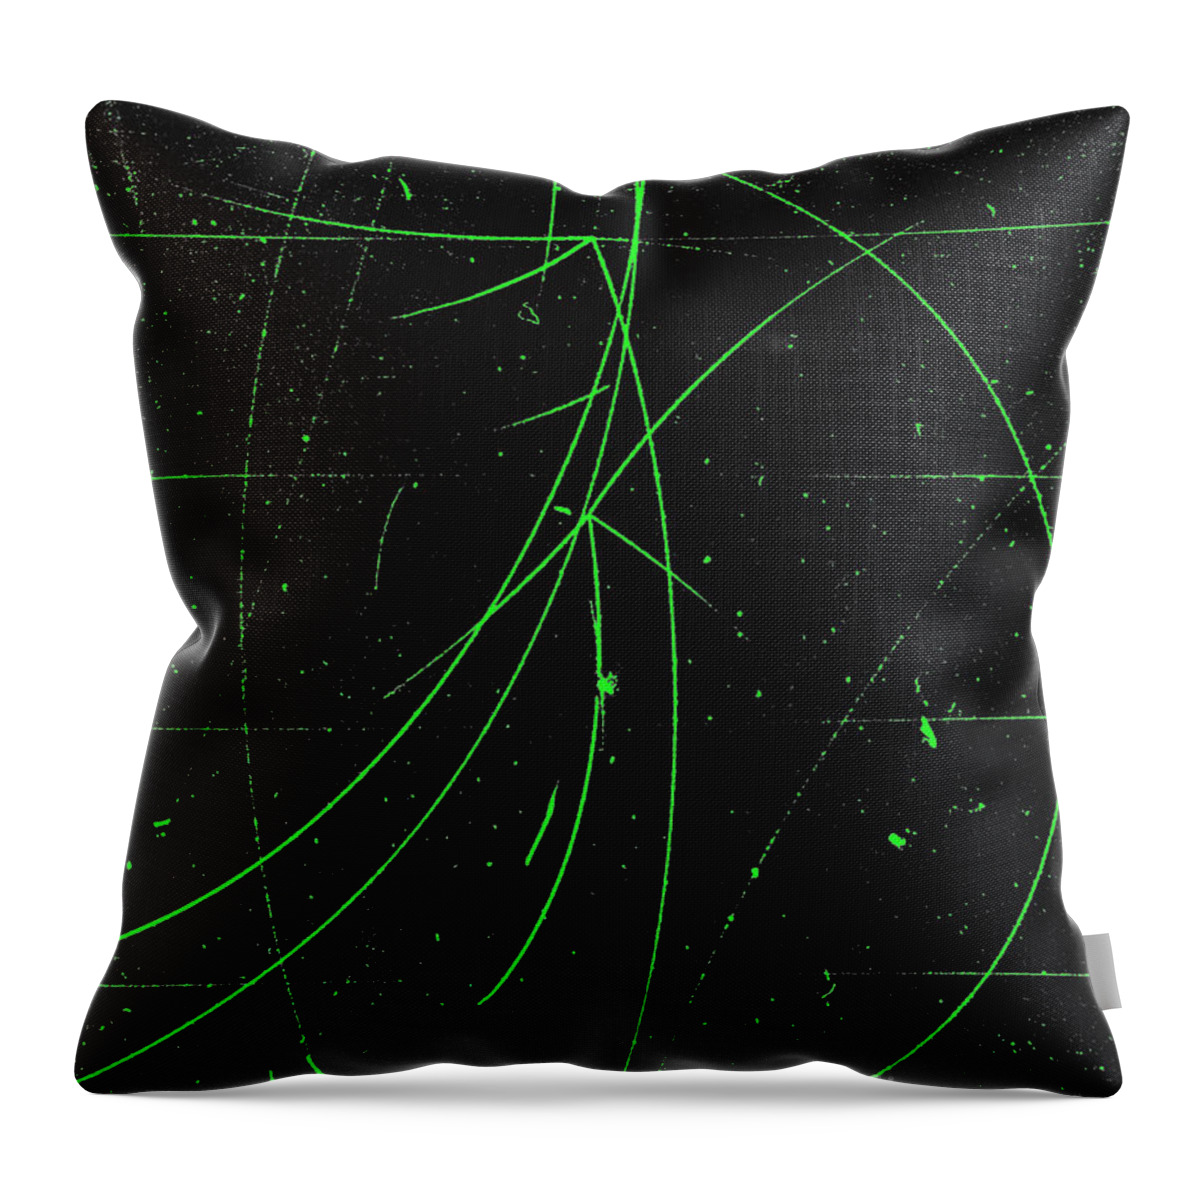 History Throw Pillow featuring the photograph Particle Tracks In Cloud Chamber by Omikron